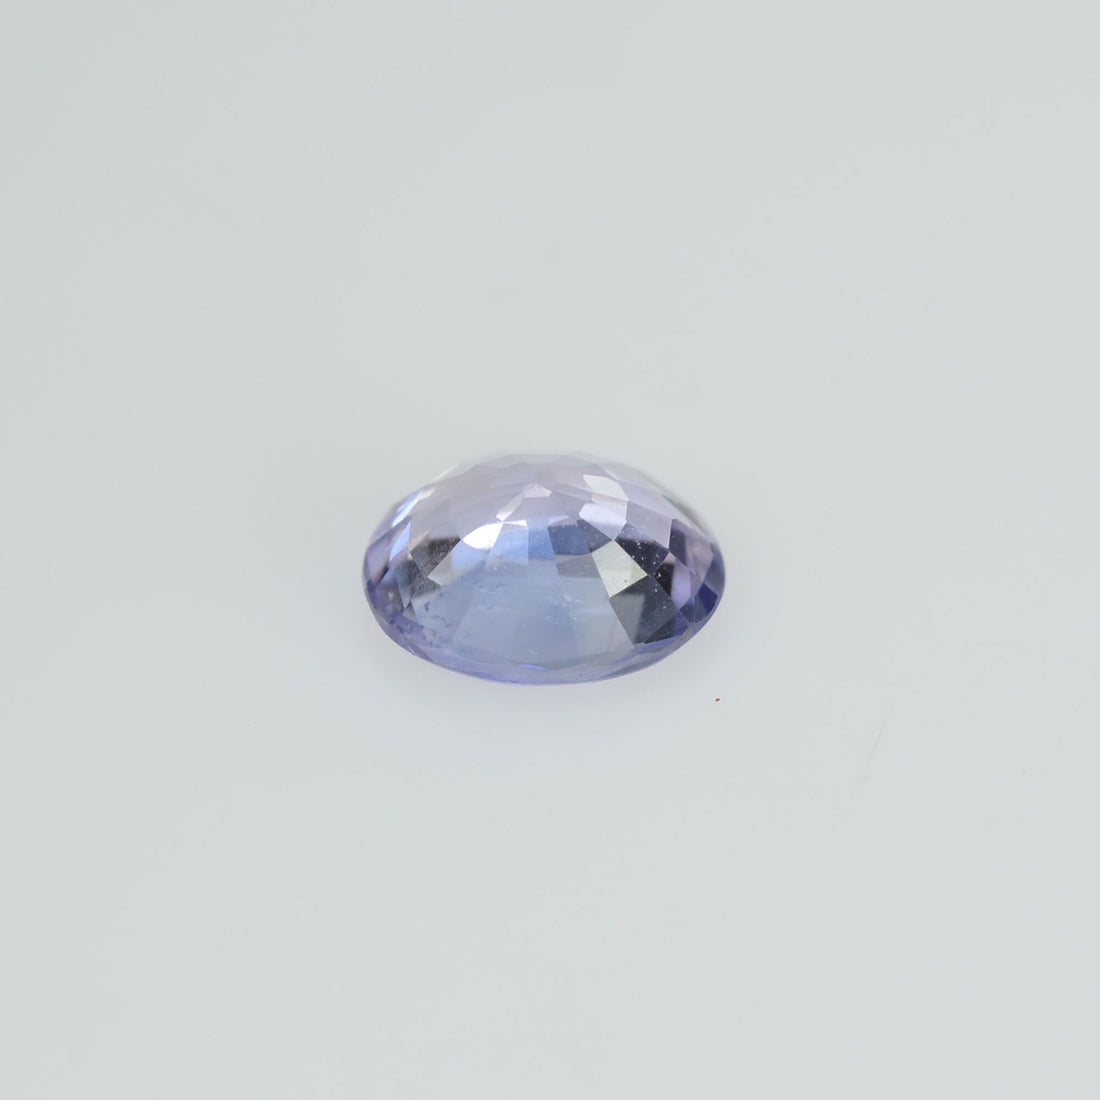 0.31 cts Natural Bi-color Sapphire Loose Gemstone Oval Cut